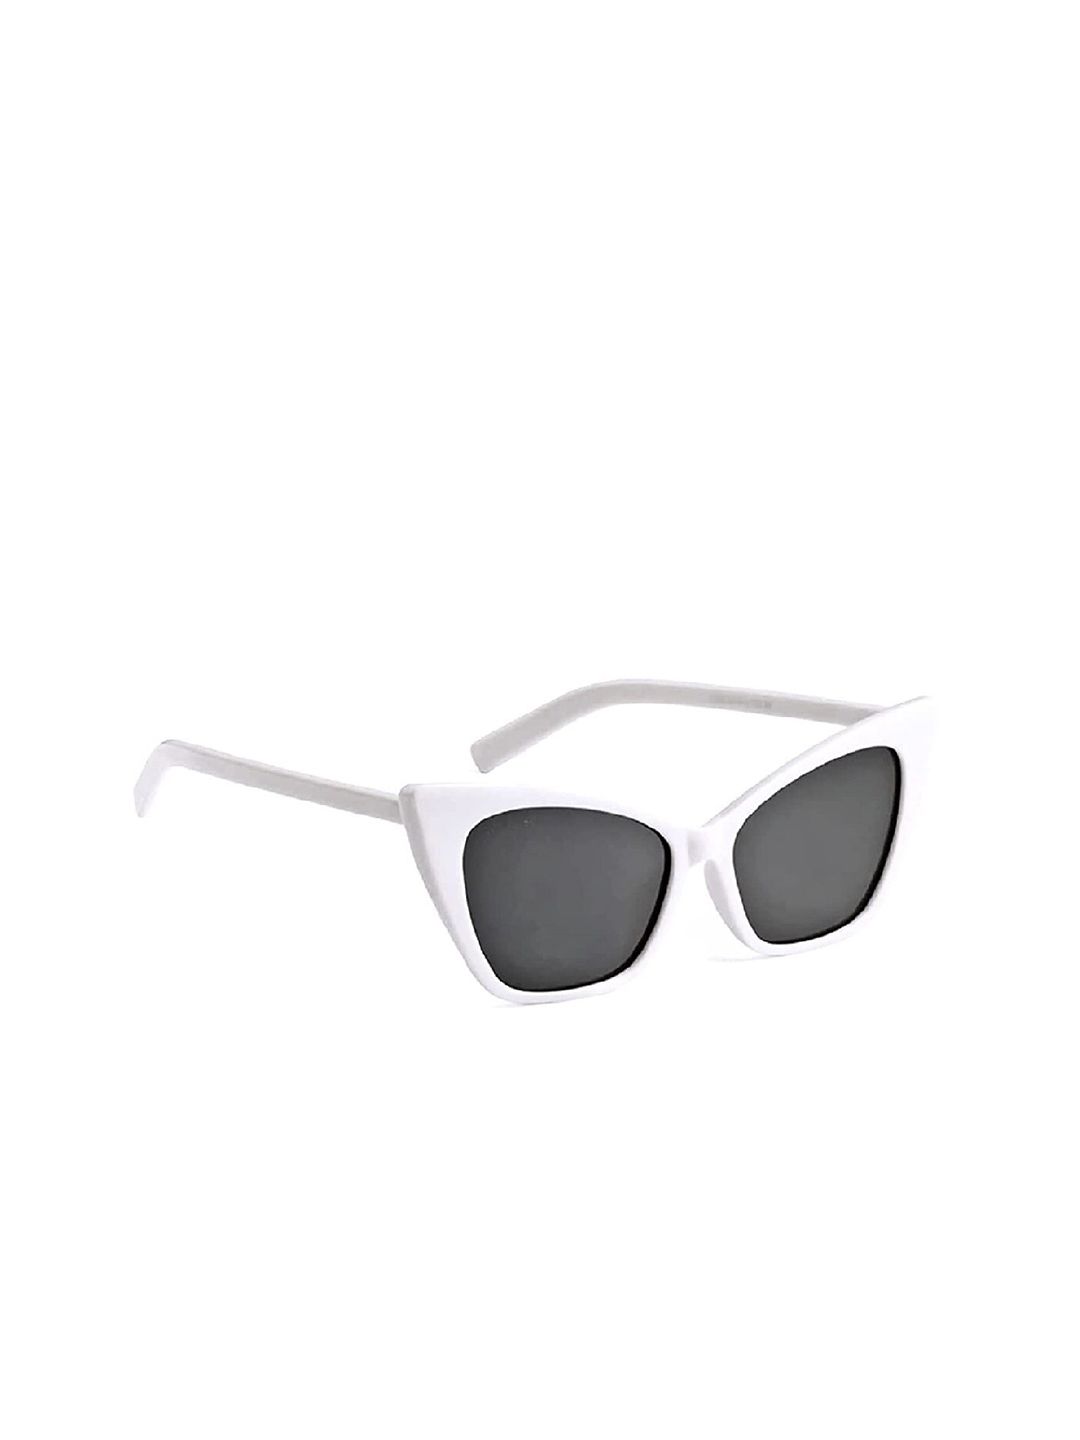 Awestuffs Women Black Lens & White Cateye Sunglasses with UV Protected Lens Price in India